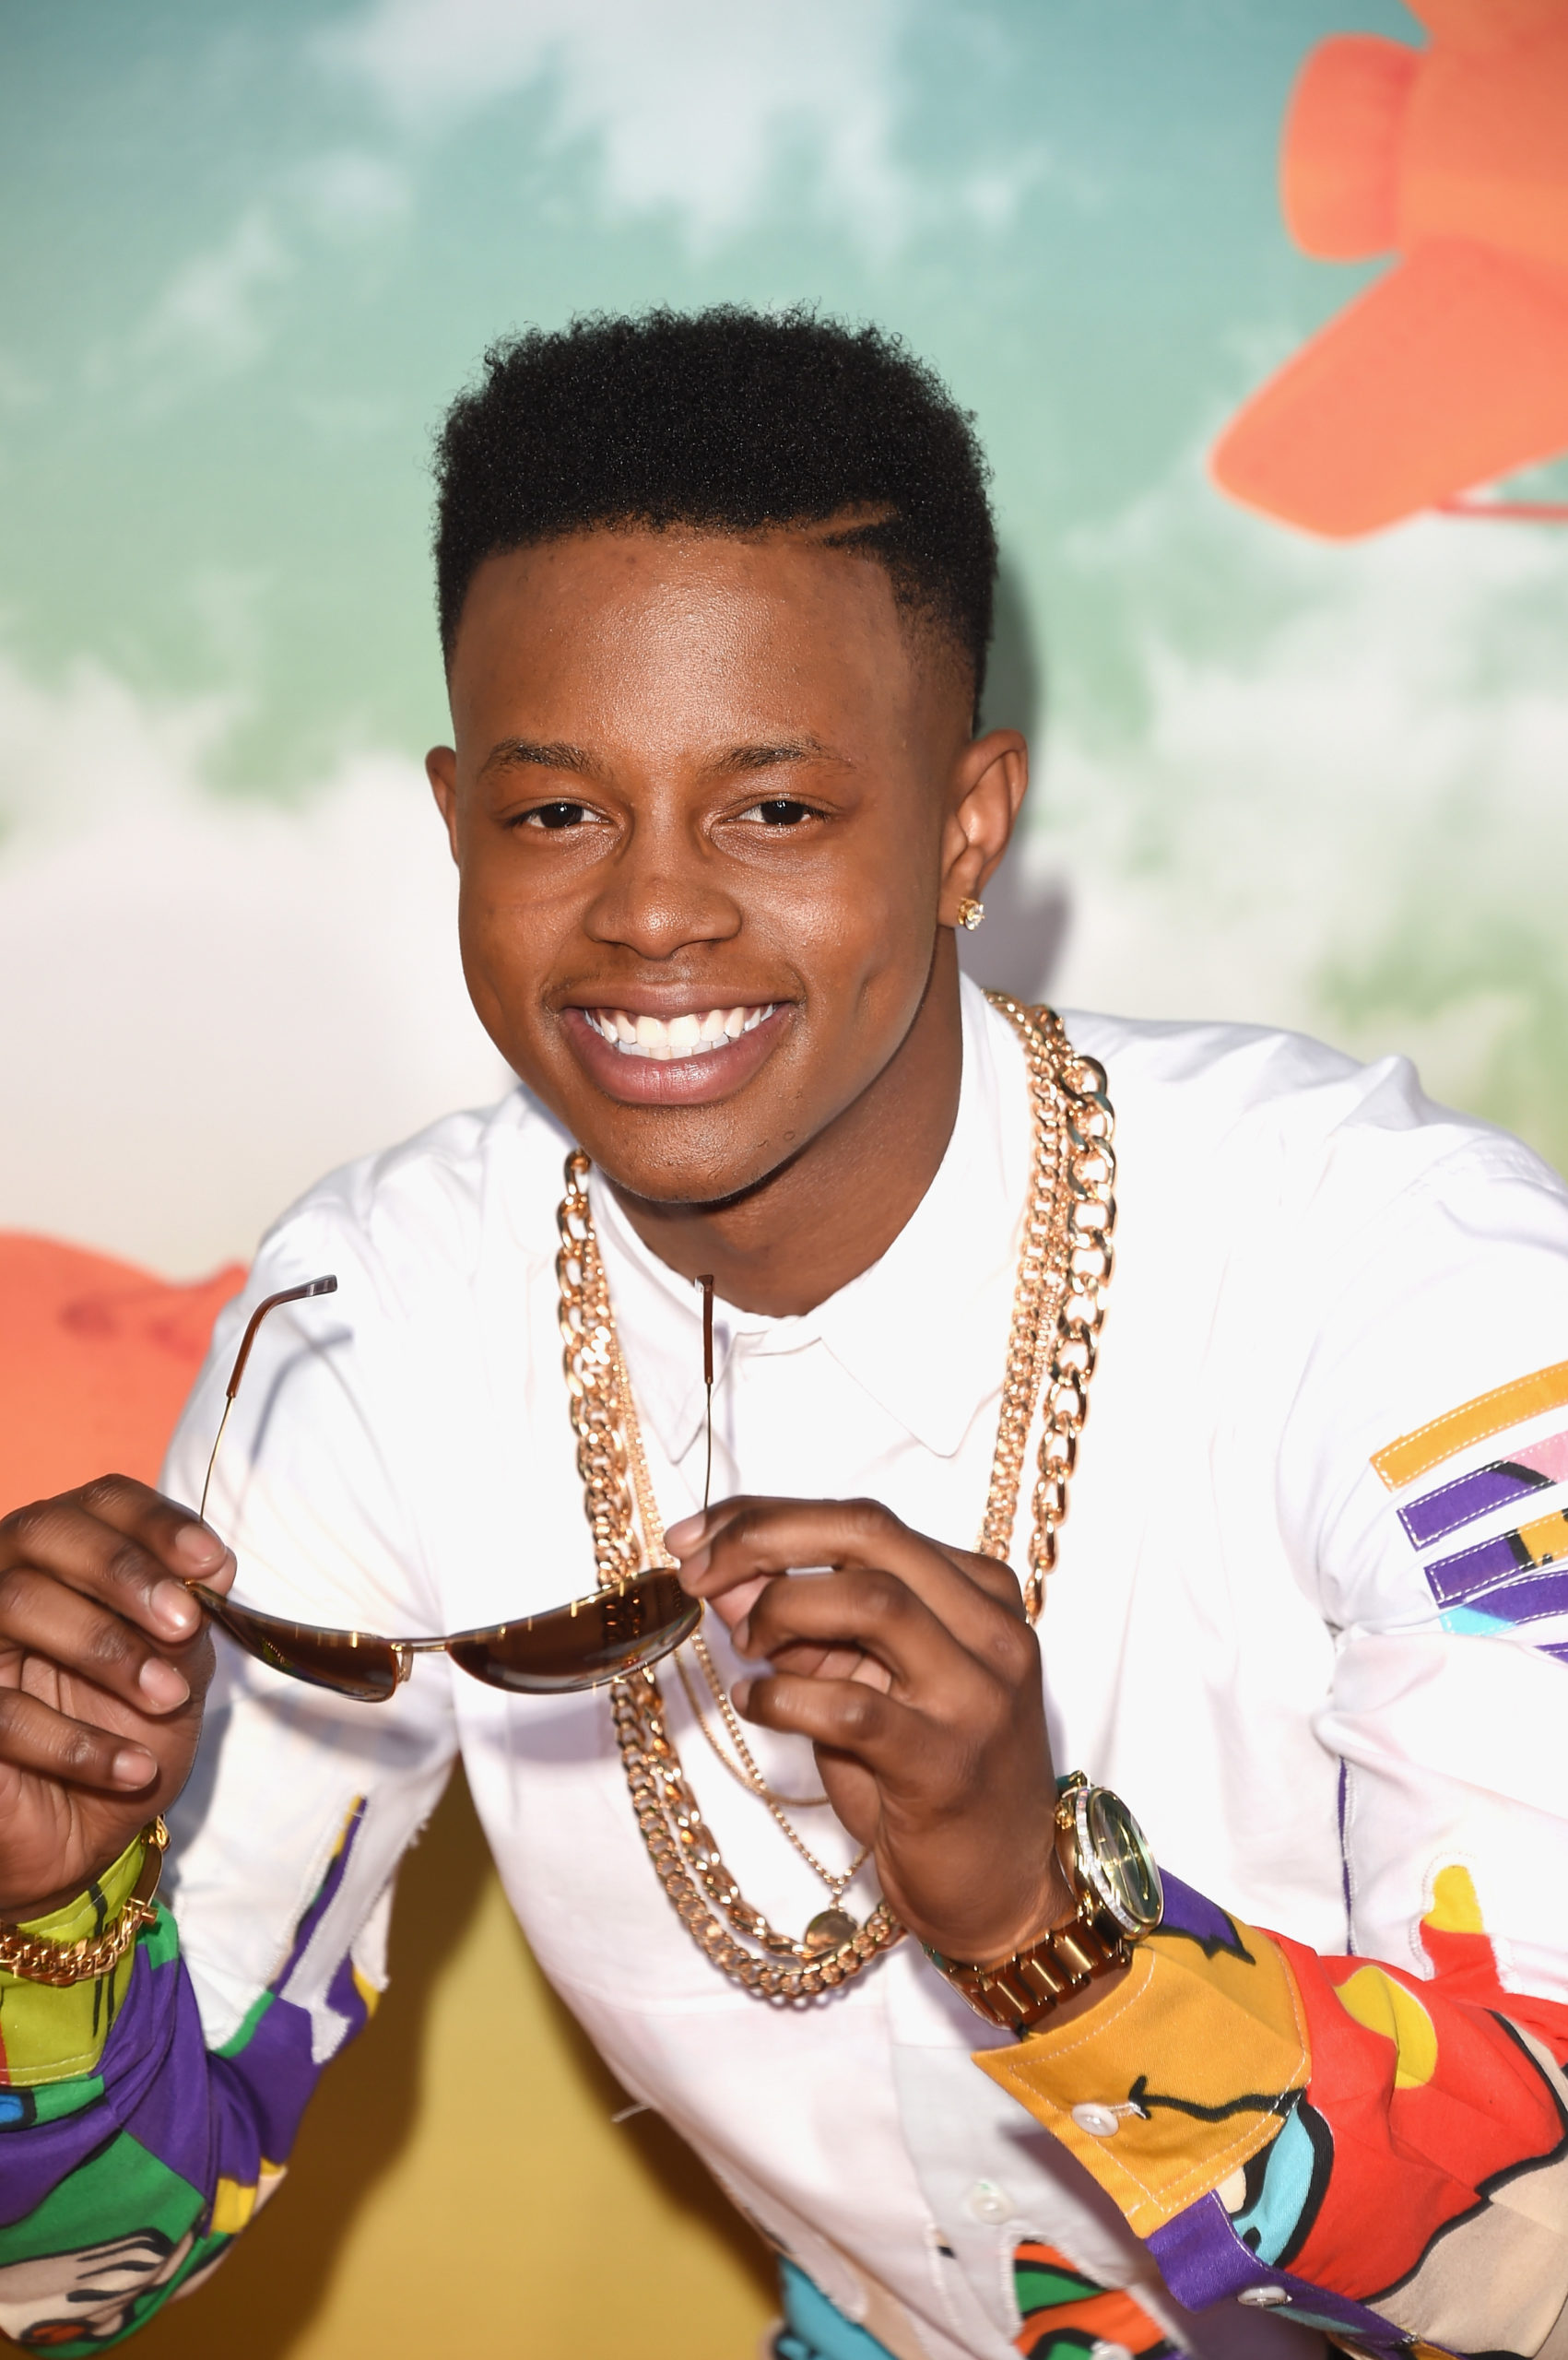 Silento, famous for the song "Watch Me (Whip/Nae Nae)